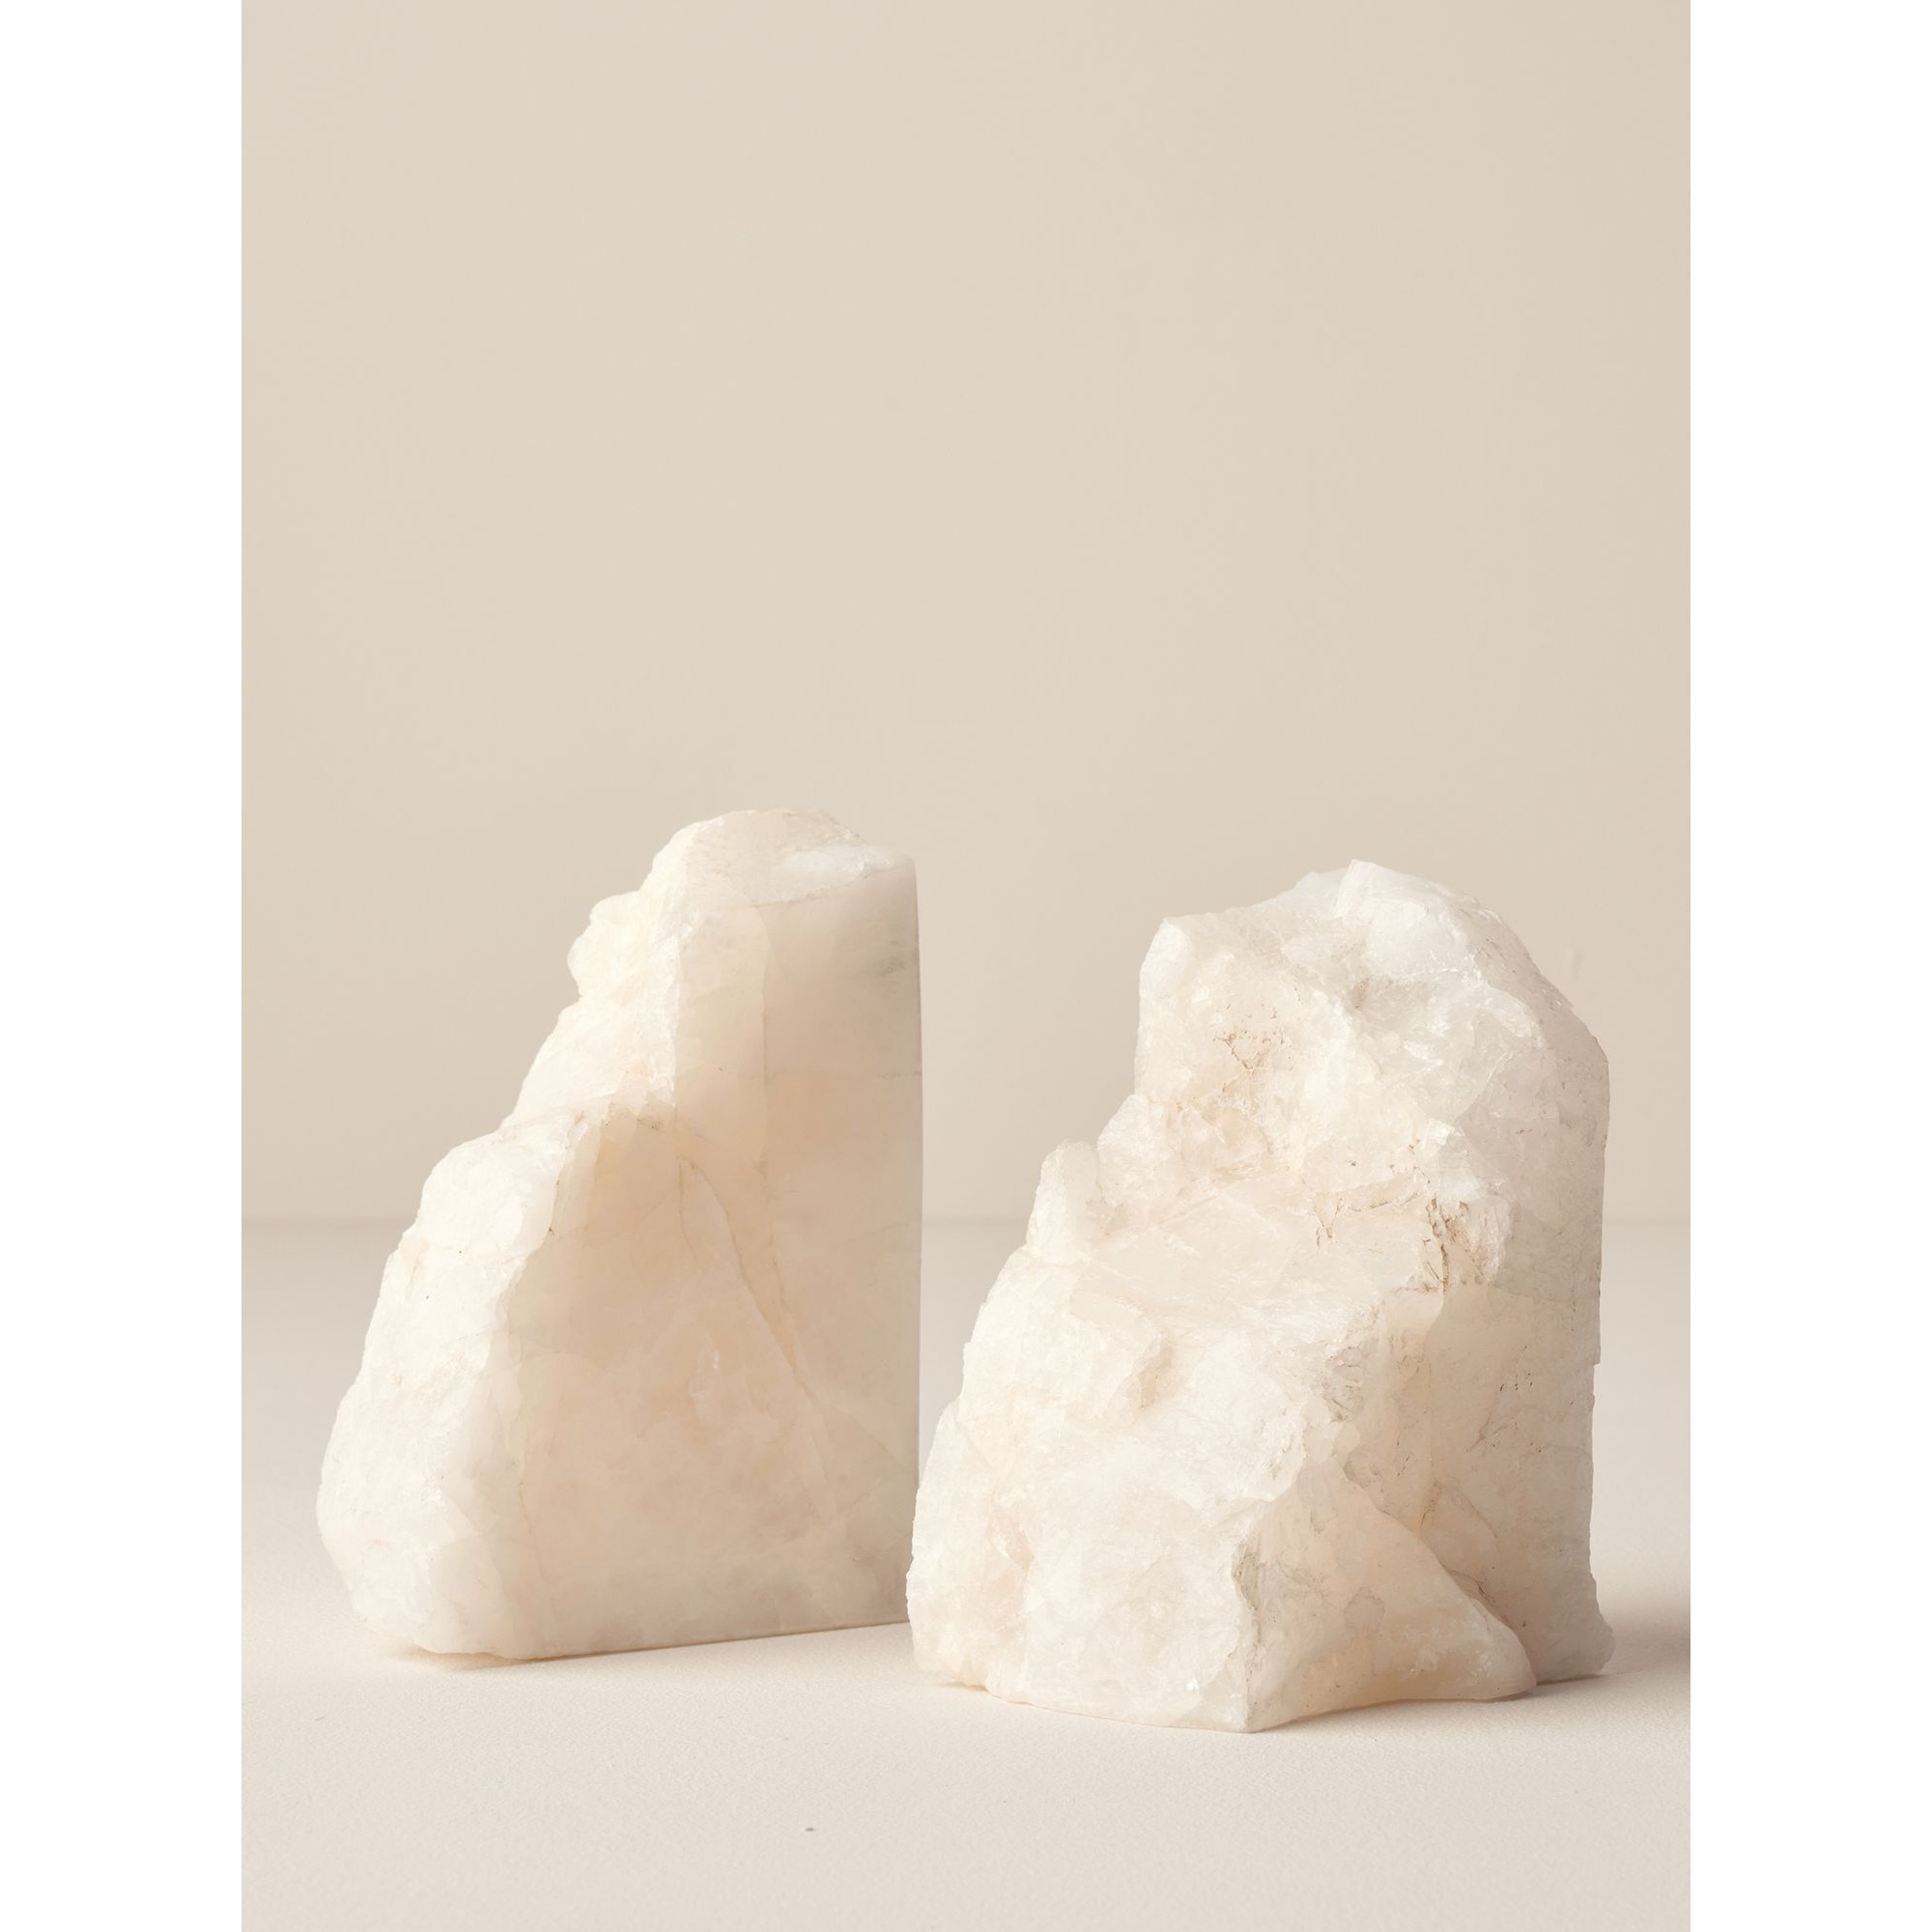 Truly Solid Quartz Bookends - image 1